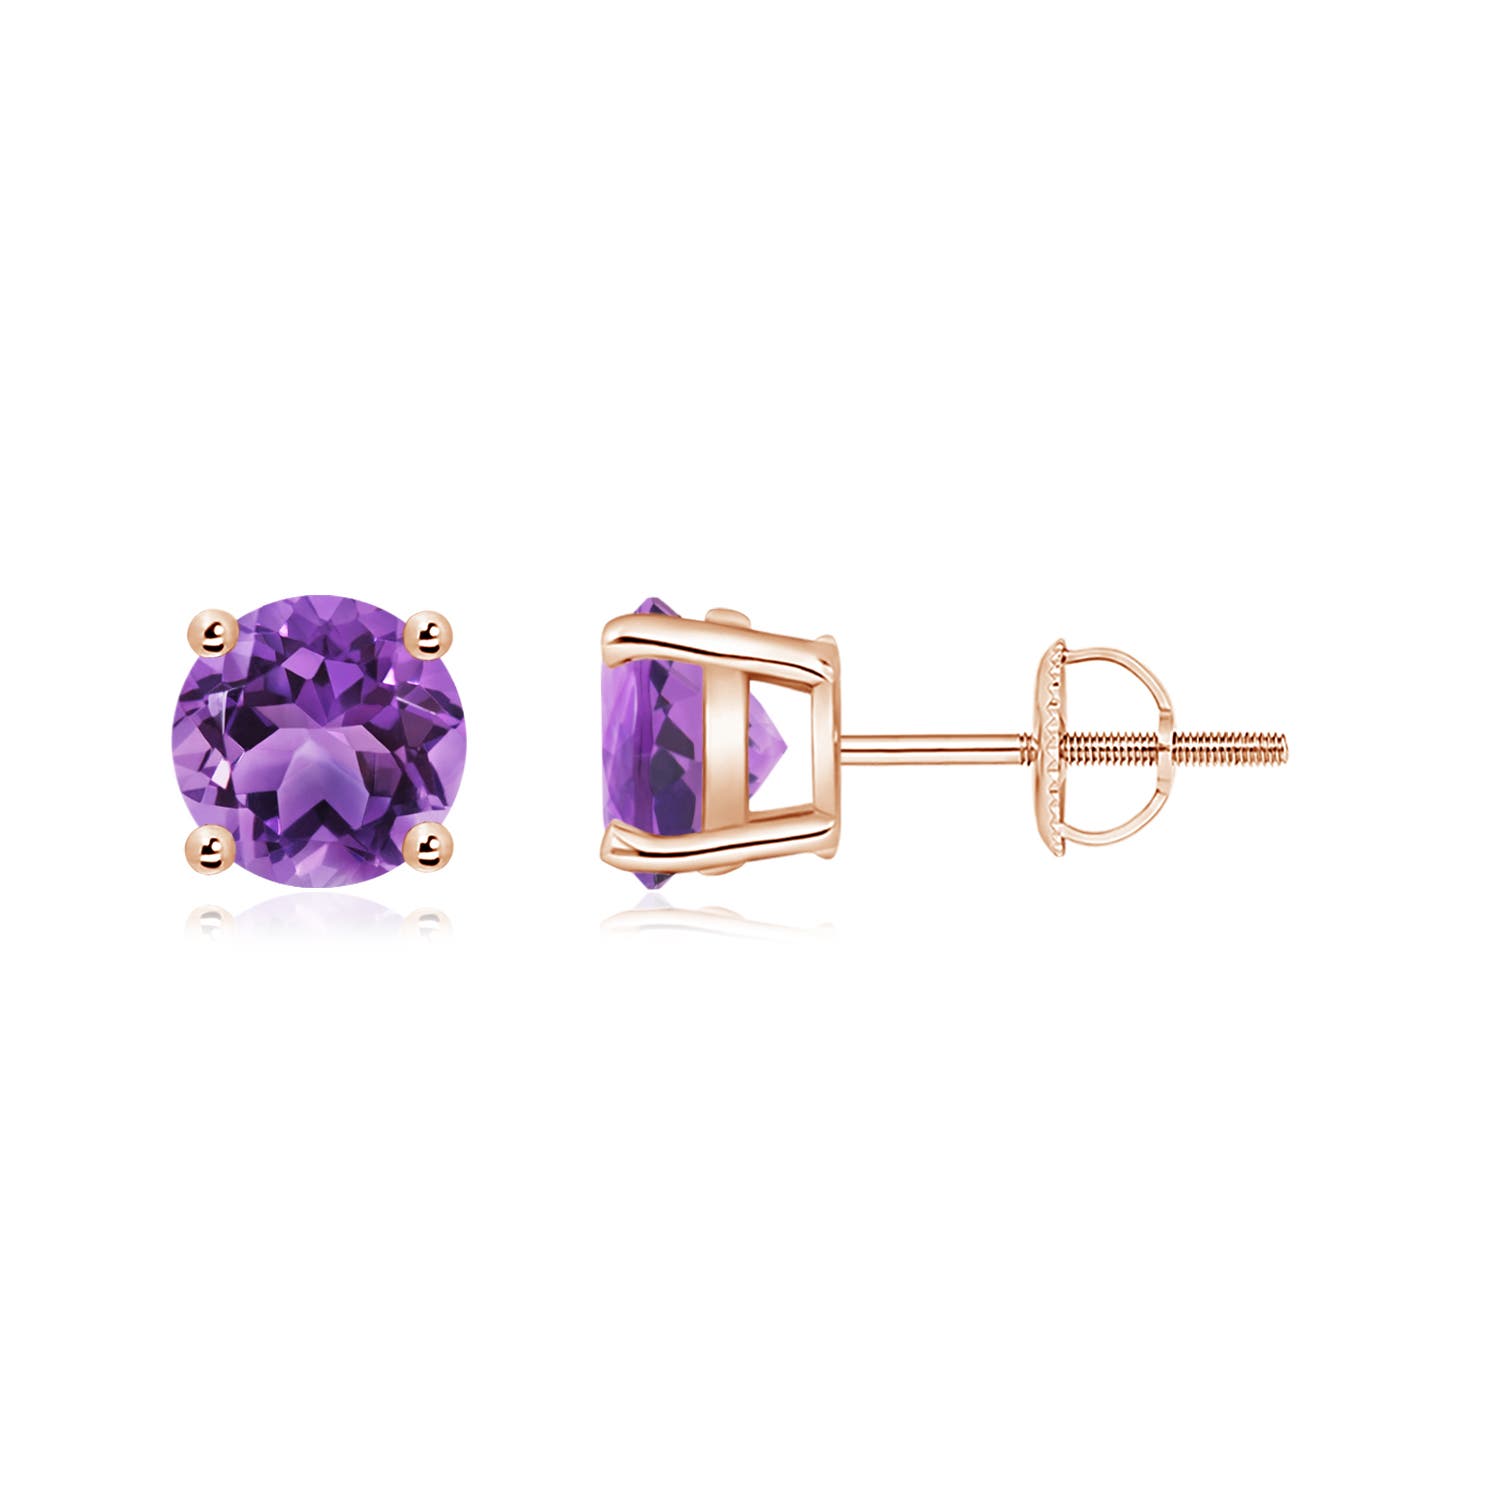 AA - Amethyst / 1.6 CT / 14 KT Rose Gold